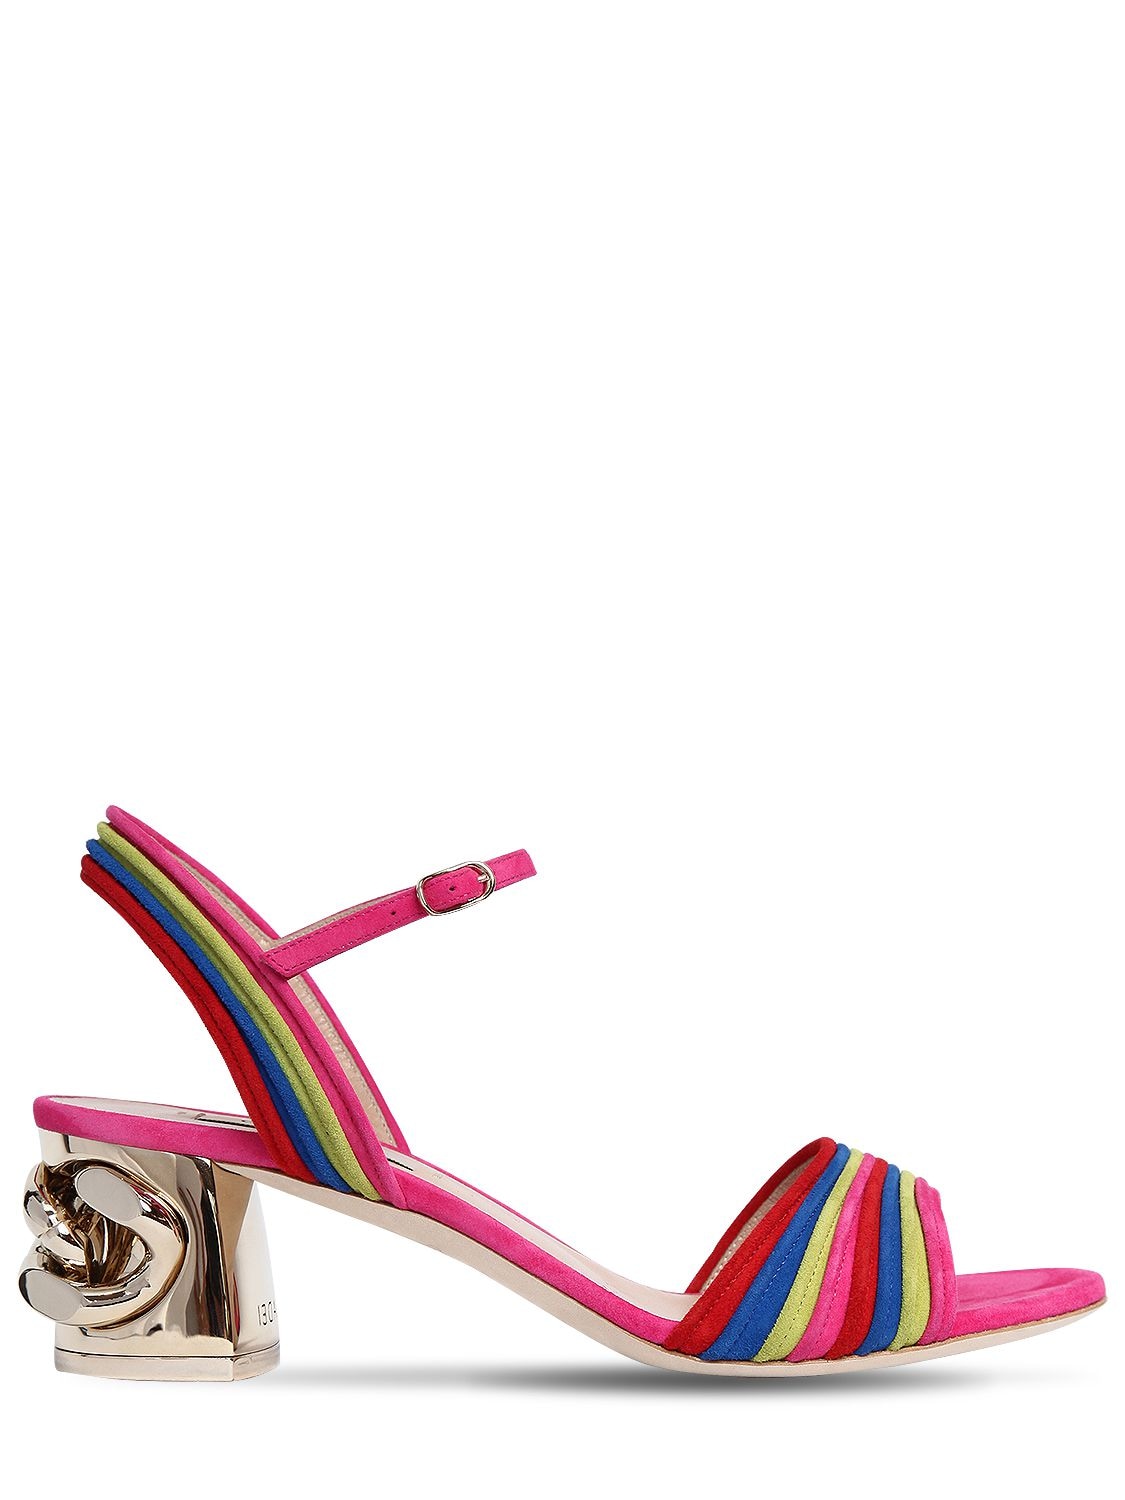 Casadei 50mm Chained Heel Rainbow Suede Sandals In Multicolor